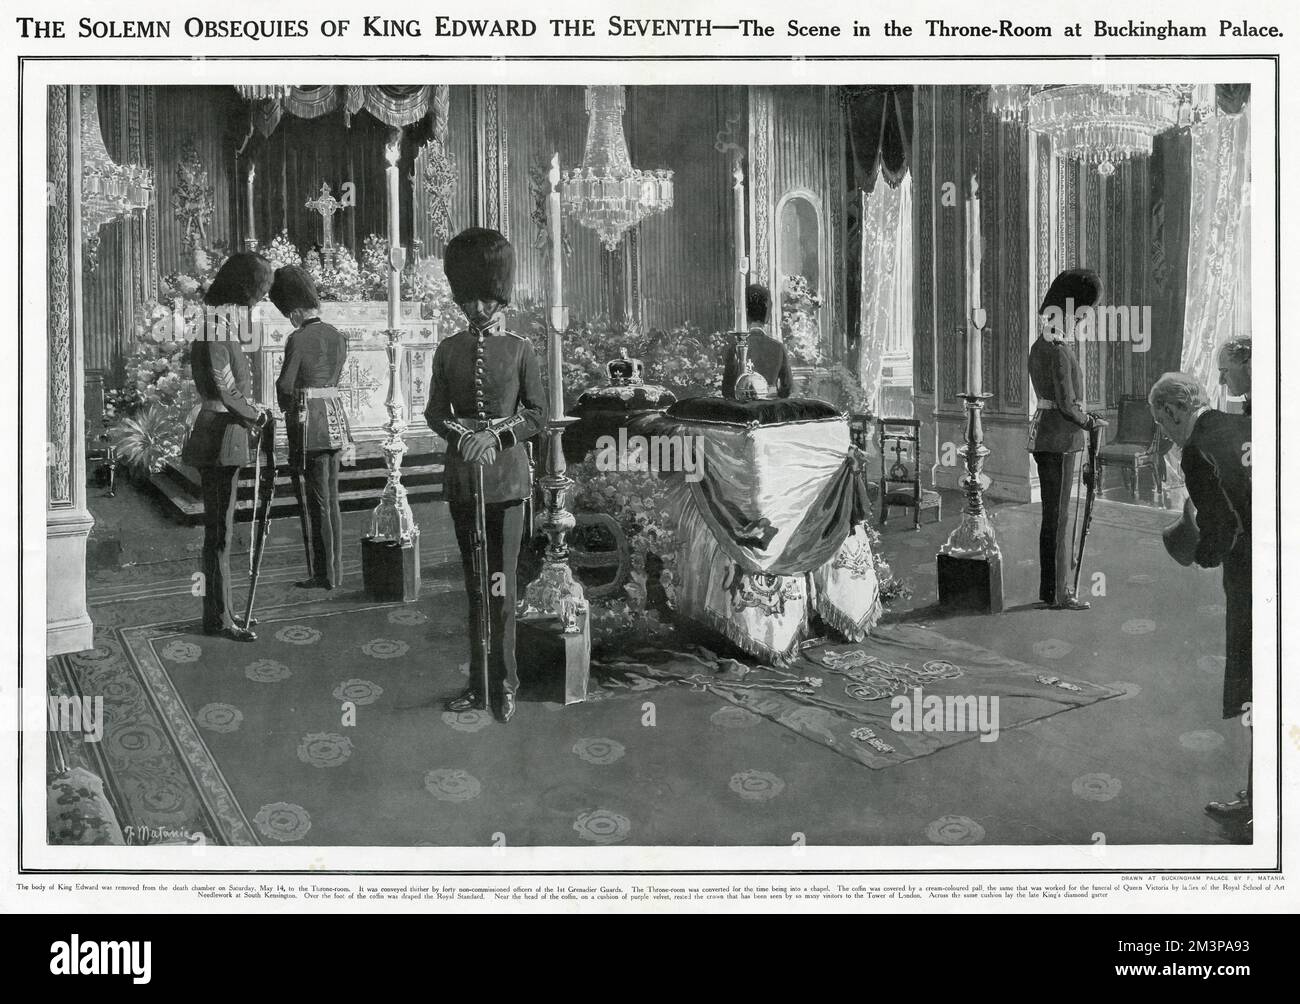 Edward VII, who passed away on 6 May 1910, at the age of 69. The King's body lay-in-state in the Throne Room at Buckingham Palace, London, guarded by Ist Grenadier Guards. Stock Photo